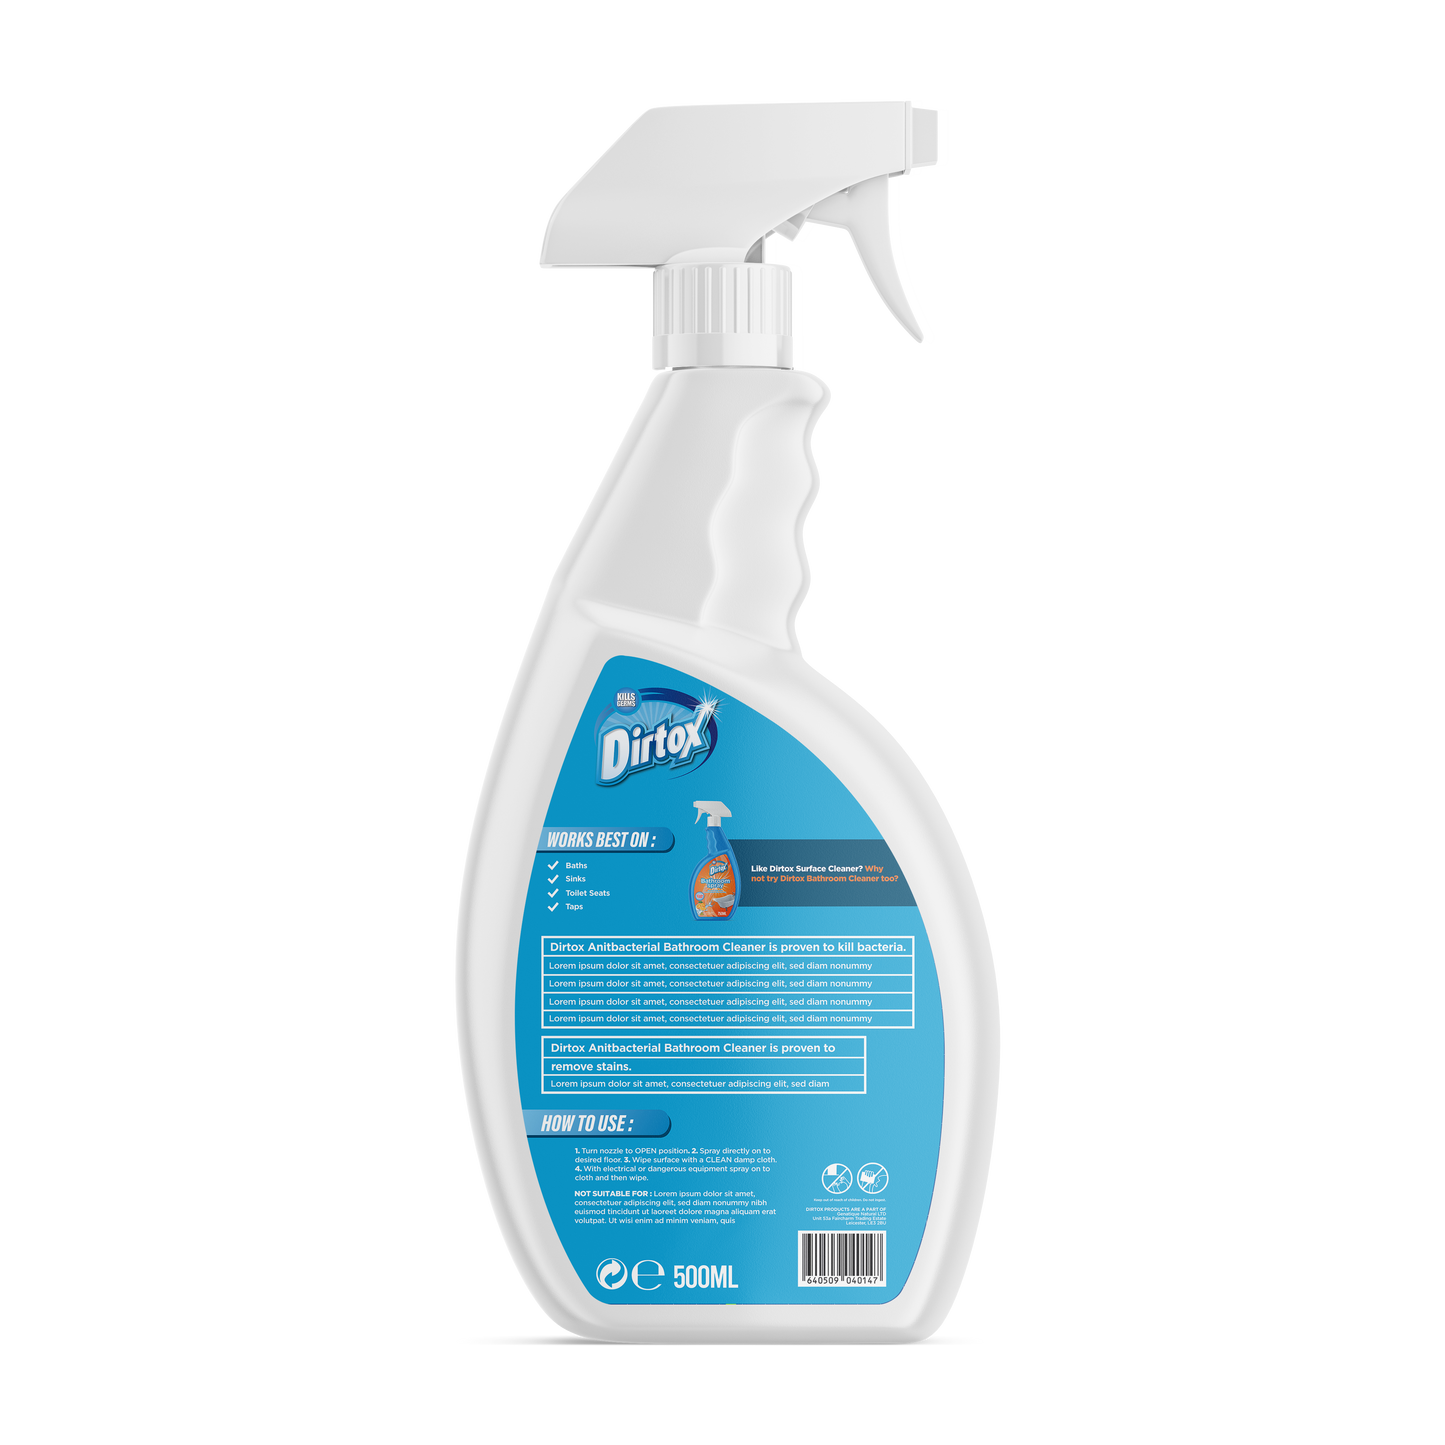 Dirtox Surface Cleaner